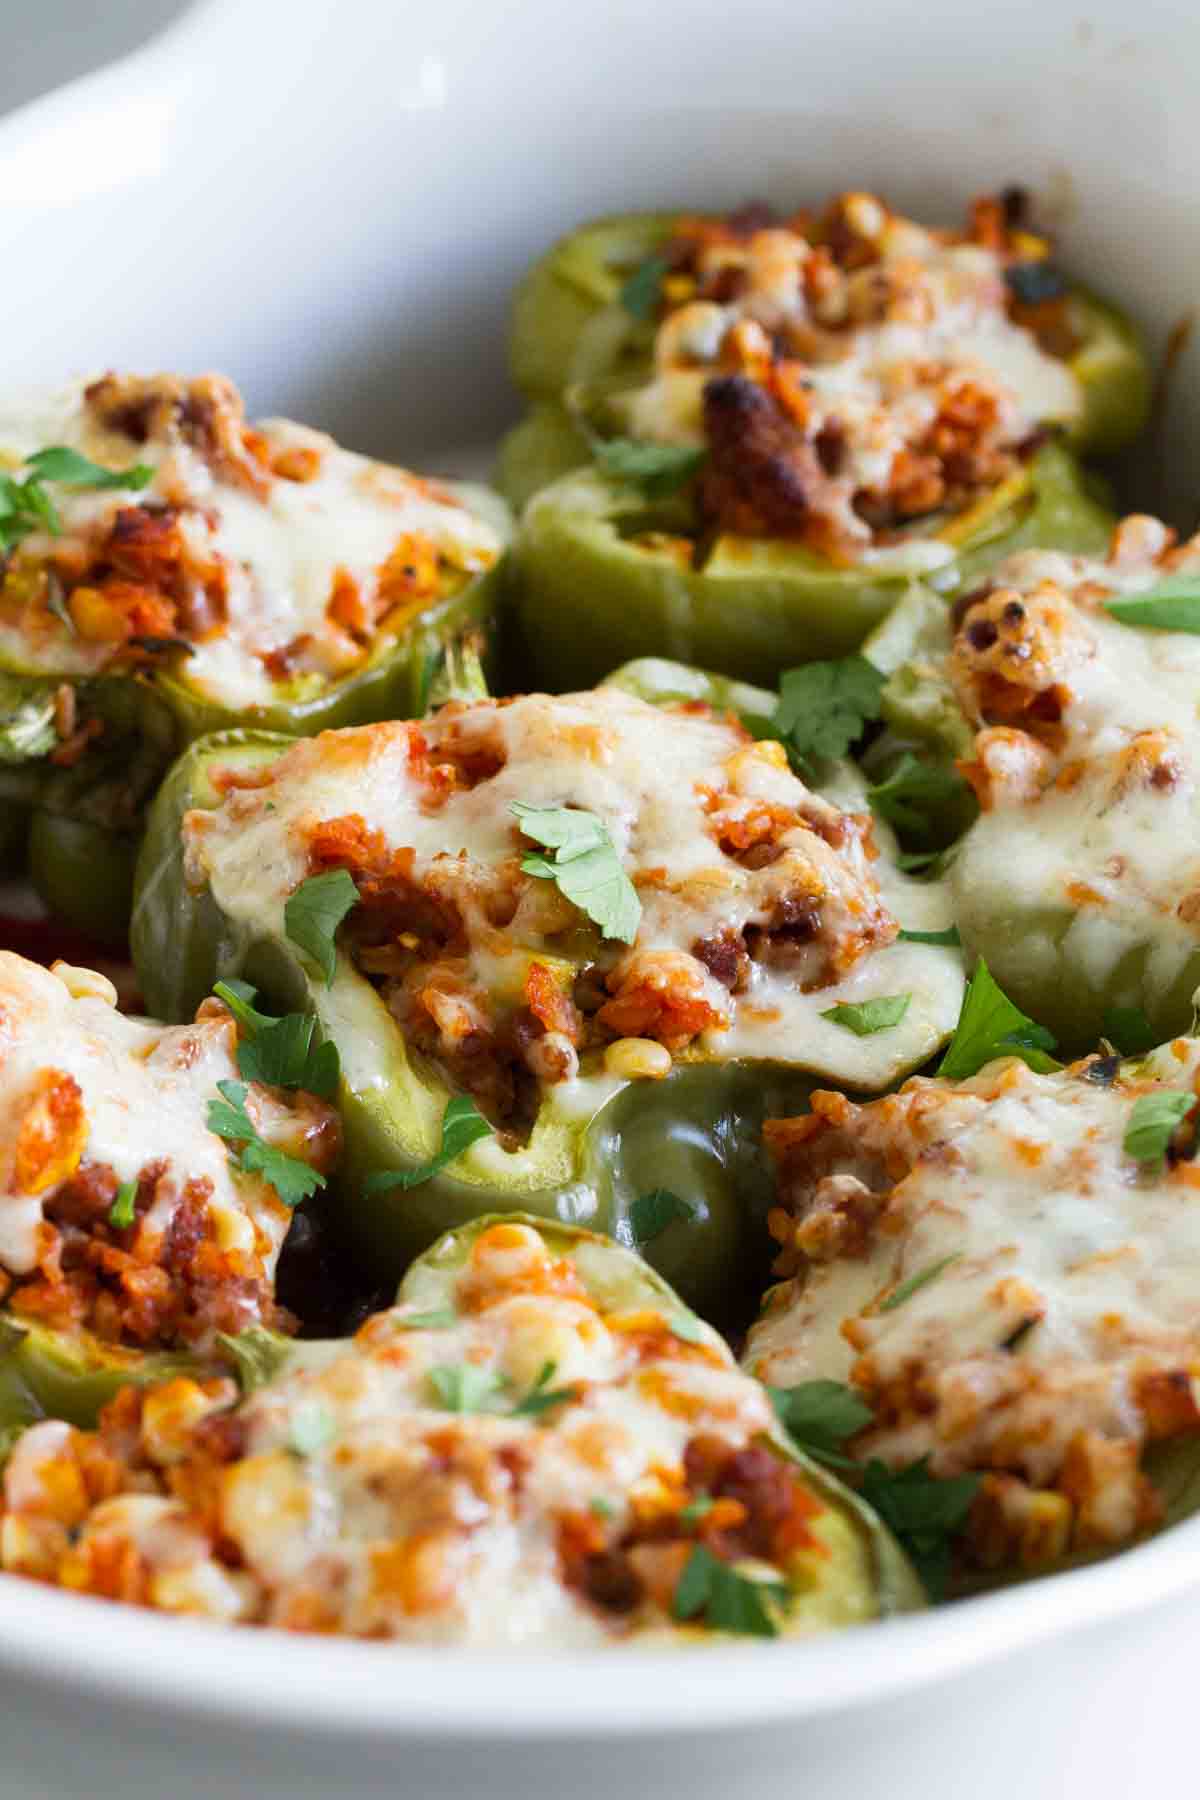 The perfect way to get in your veggies, these Vegetable and Sausage Stuffed Peppers are stuffed with lots of veggies, rice and flavorful sausage. The perfect end of summer meal!